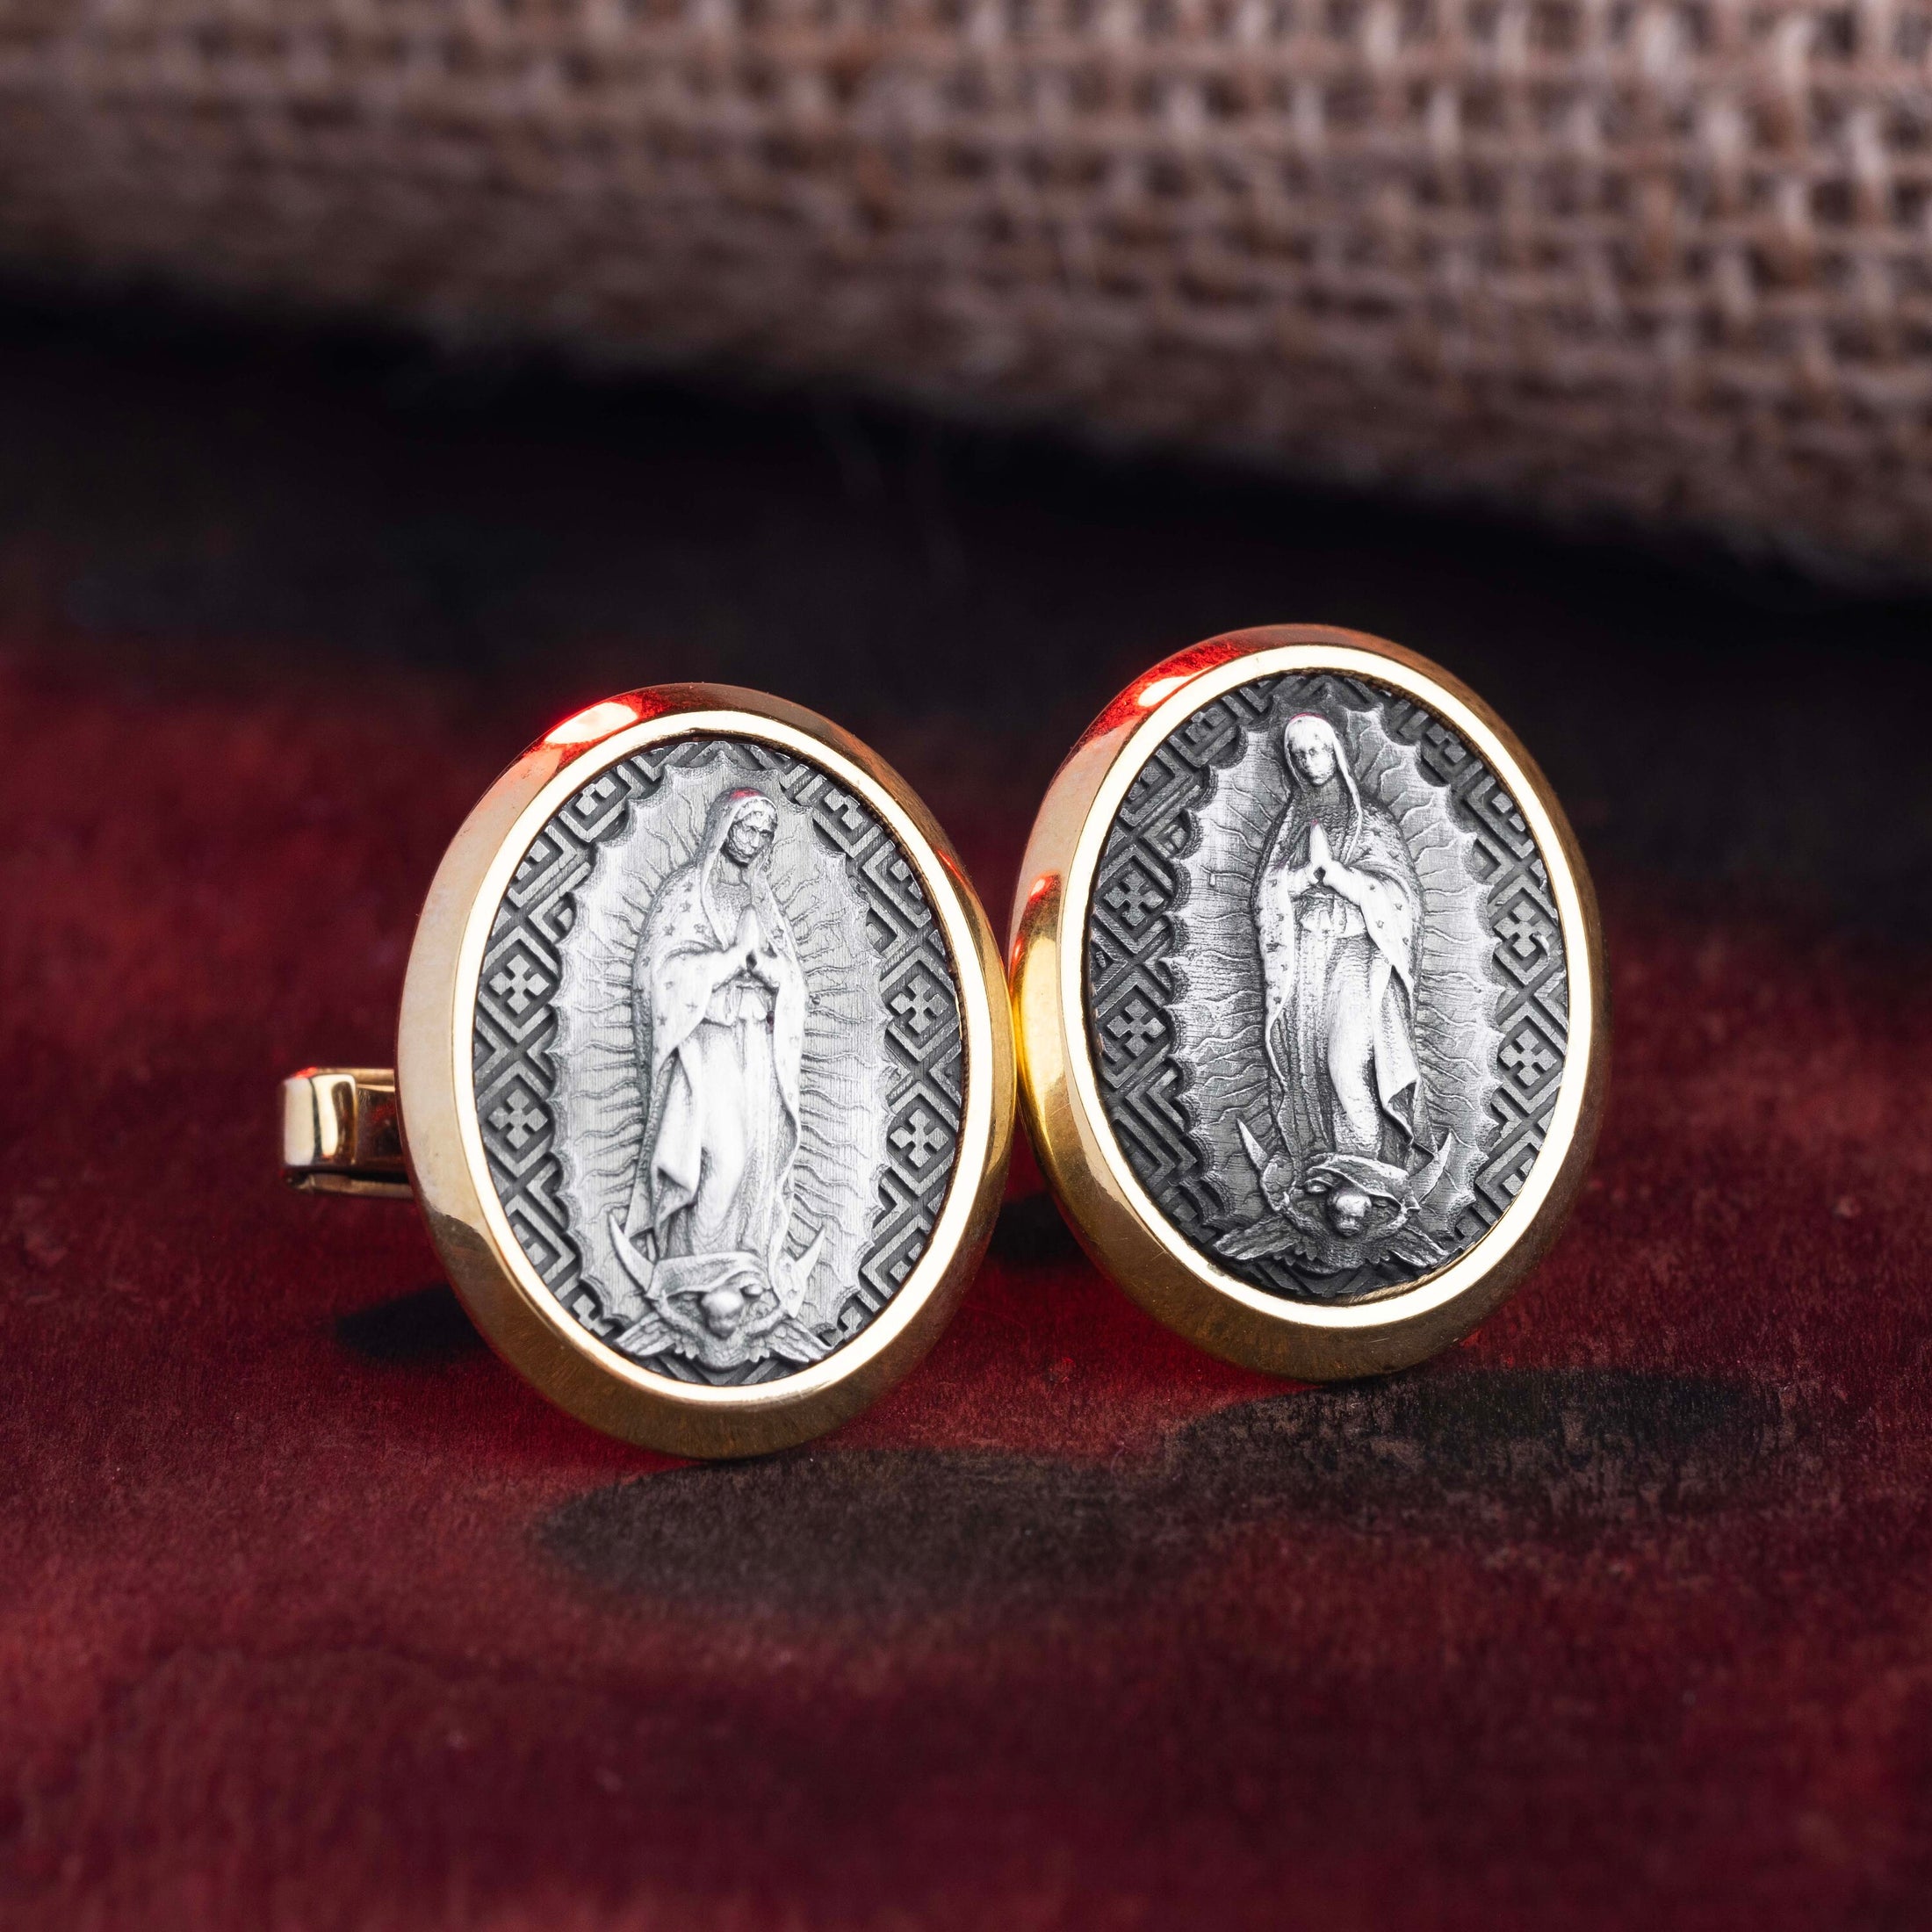 Lady Of Guadalupe Cufflinks, Virgen De Guadalupe, Virgin Mary, Memorial Gift, Catholic Cufflinks, Groomsman Gift, Religious Gift